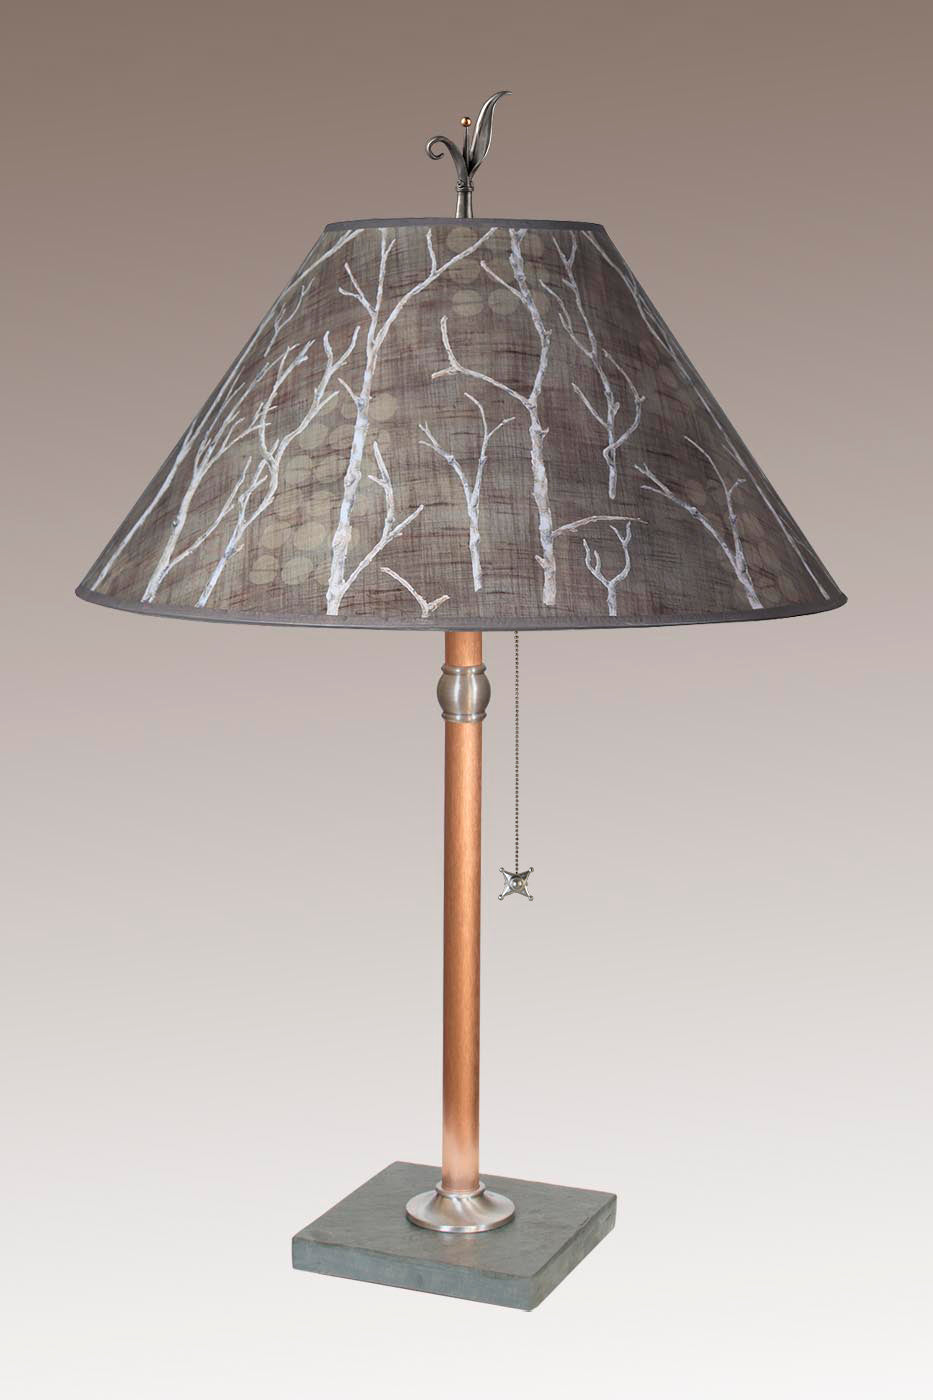 Janna Ugone & Co Table Lamp Copper Table Lamp with Large Conical Shade in Twigs